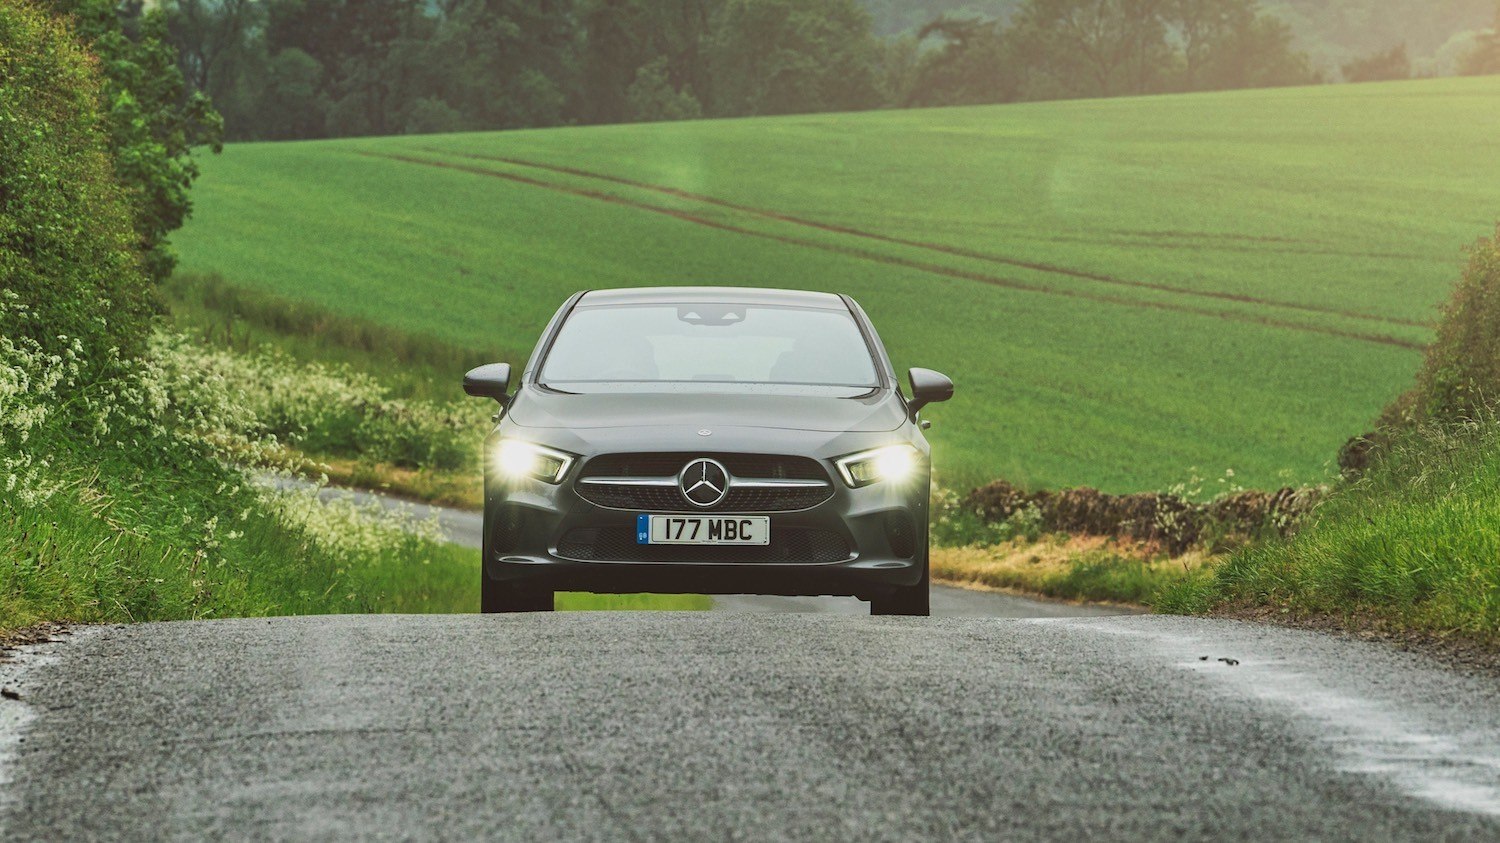 Tim Barnes-Clay reviews the New Mercedes-Benz A-Class 19